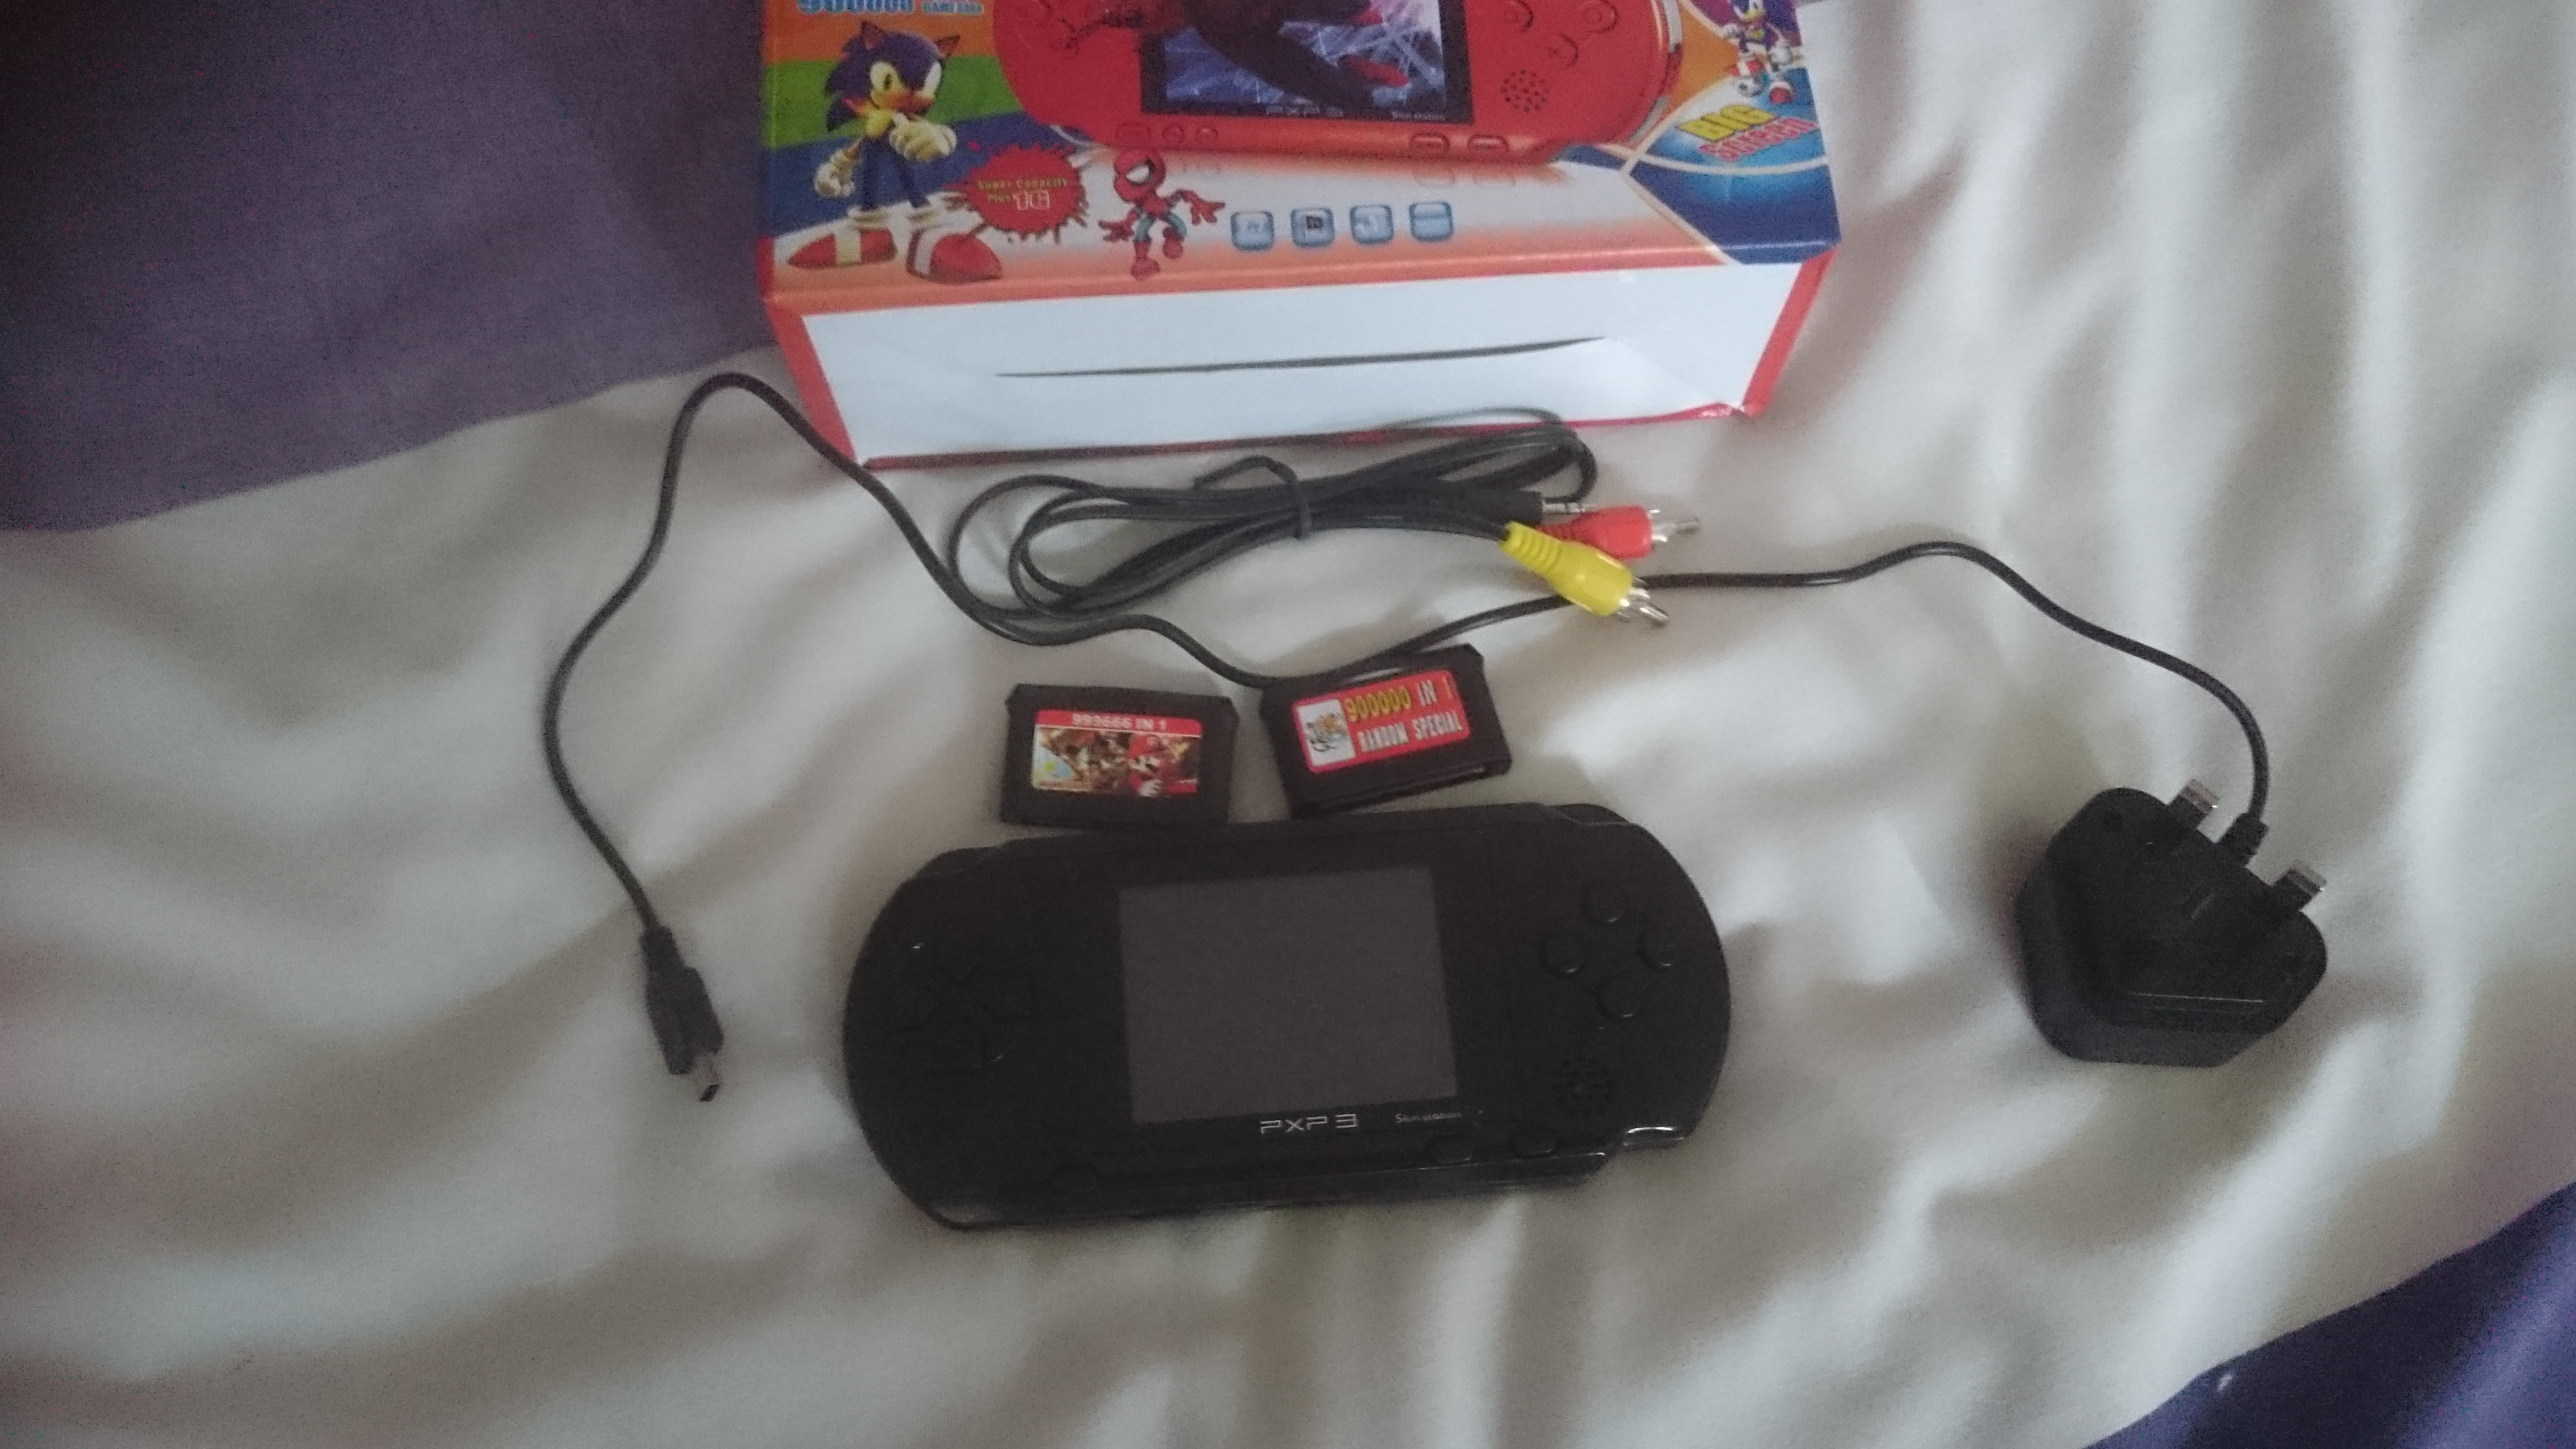 Christmas Gift, PXP3 Slim station with Mario brother and Contra over 100  Retro games (DARK BLUE) 